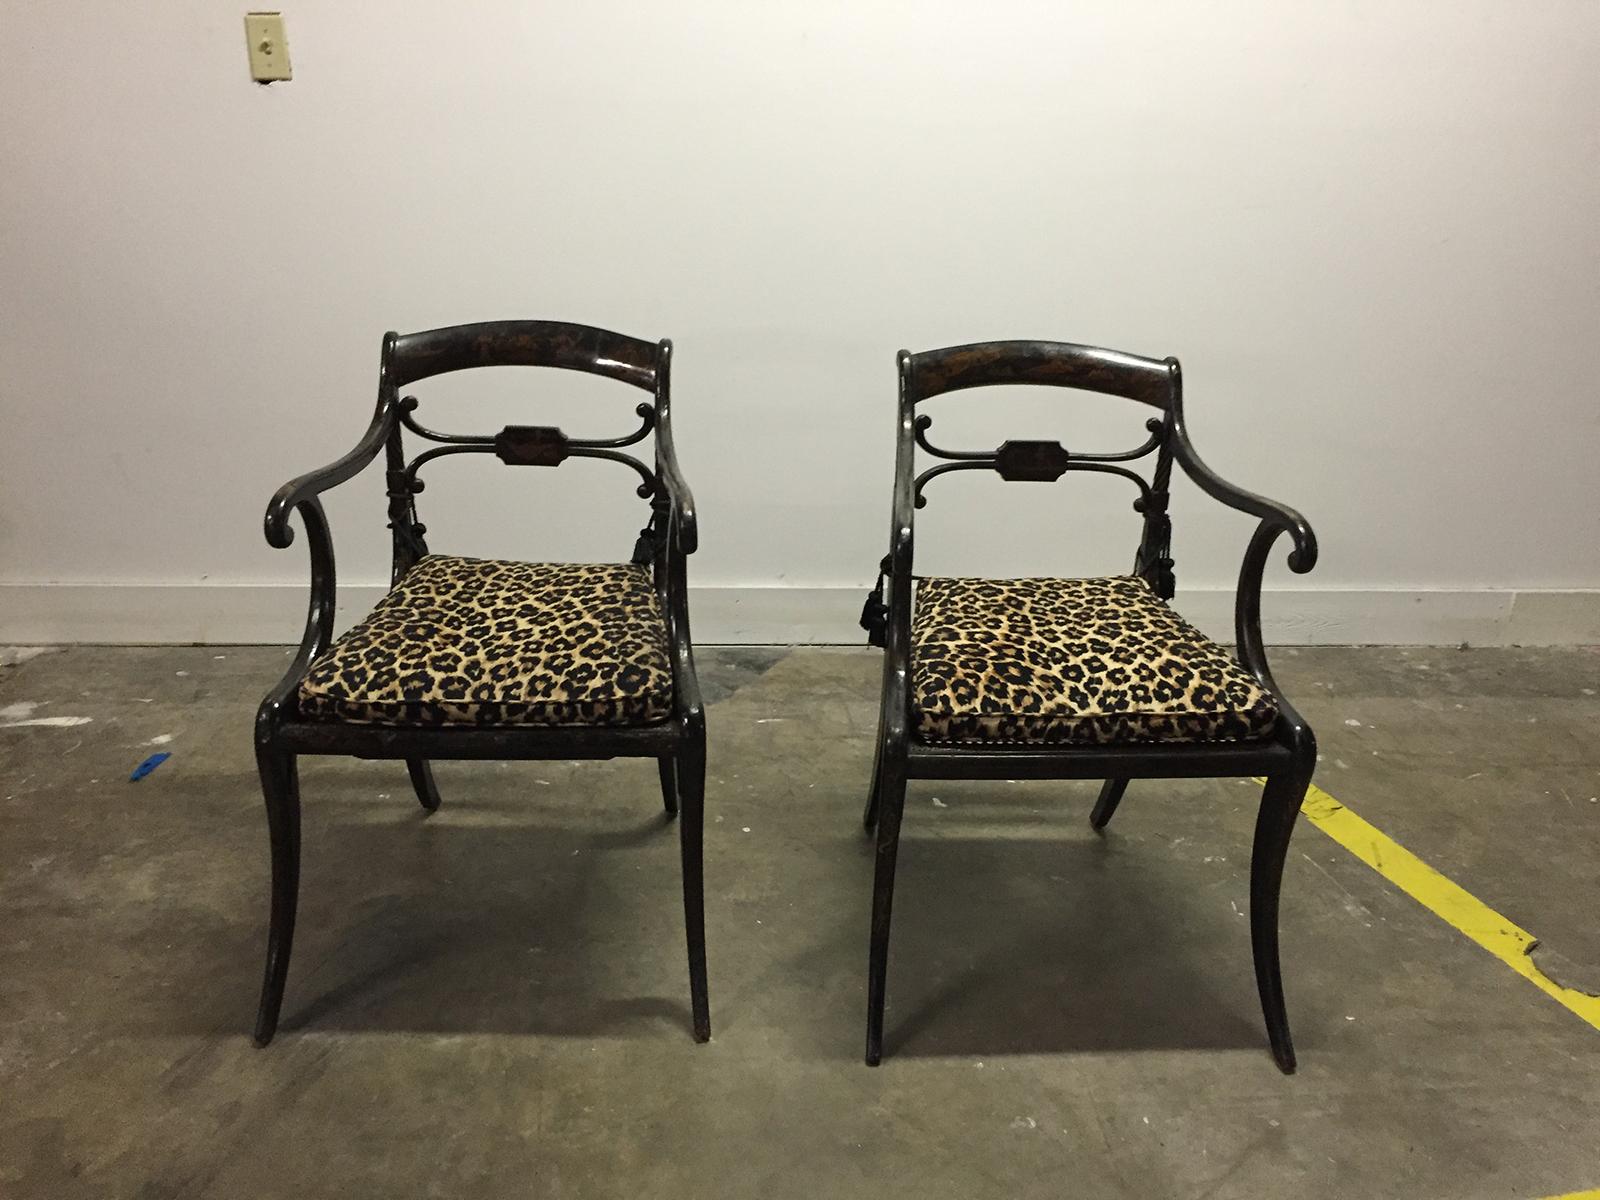 Pair of 19th century Regency ebonized armchairs, old painted finish
Measures: 21.5